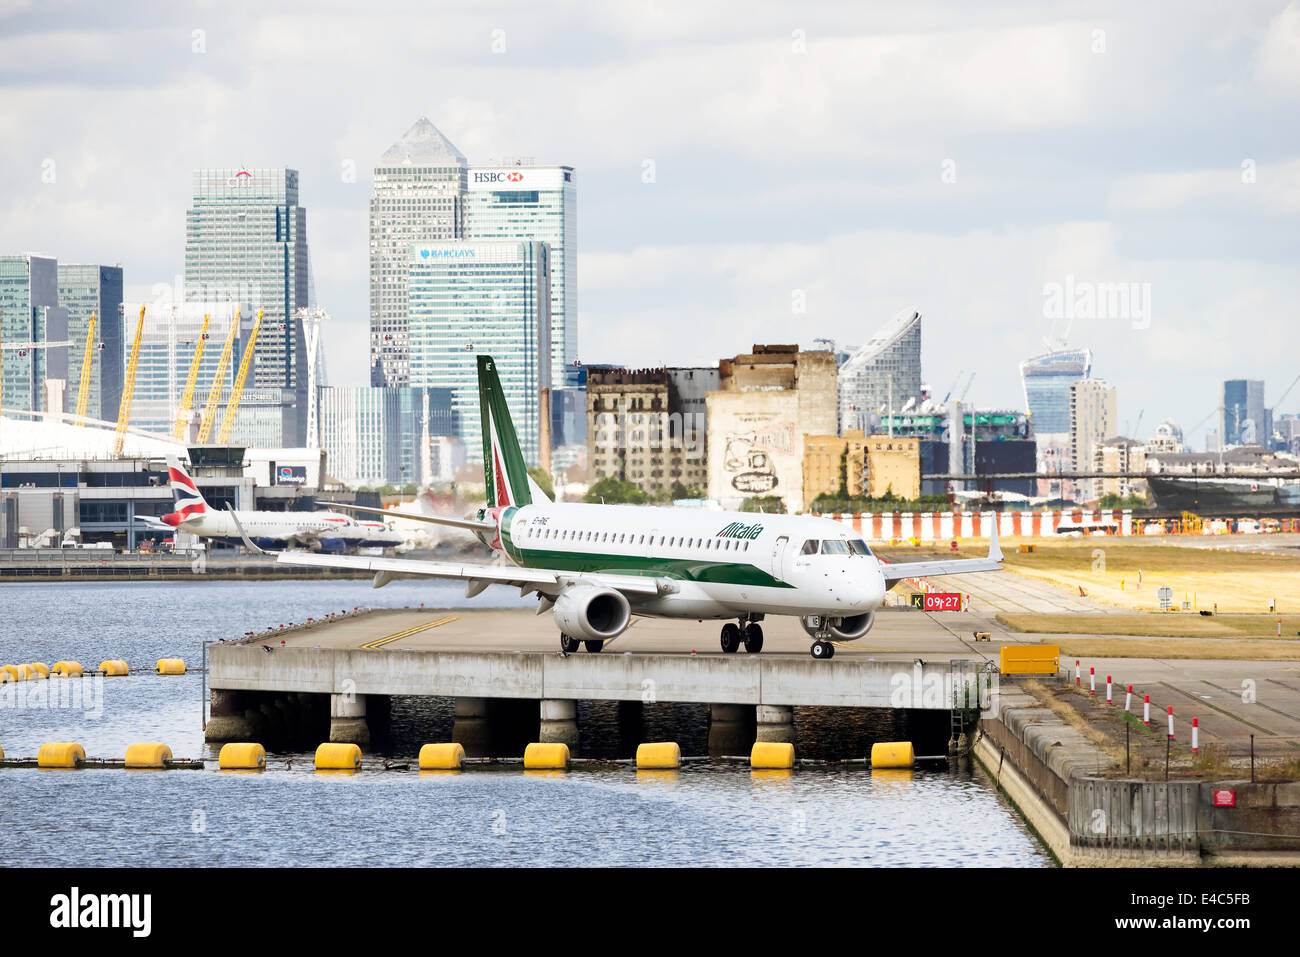 An Alitalia CityLiner passenger jet taxis prior to takeoff at London City Airport Stock Photo